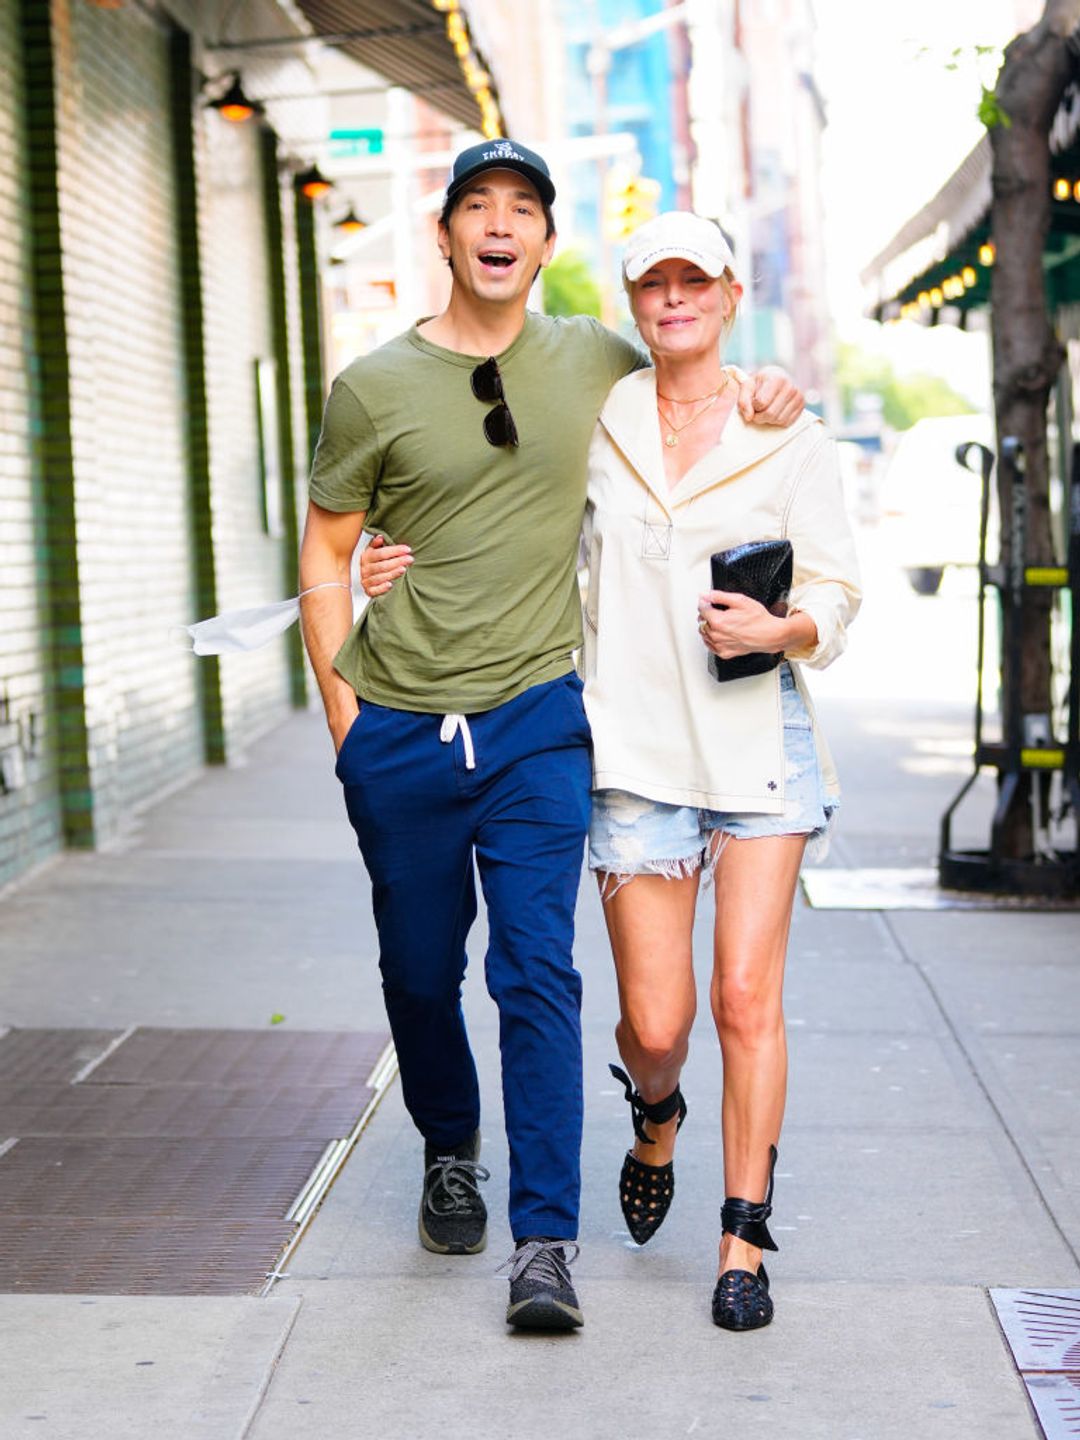 Justin Long and Kate Bosworth strolling arm in arm in New York